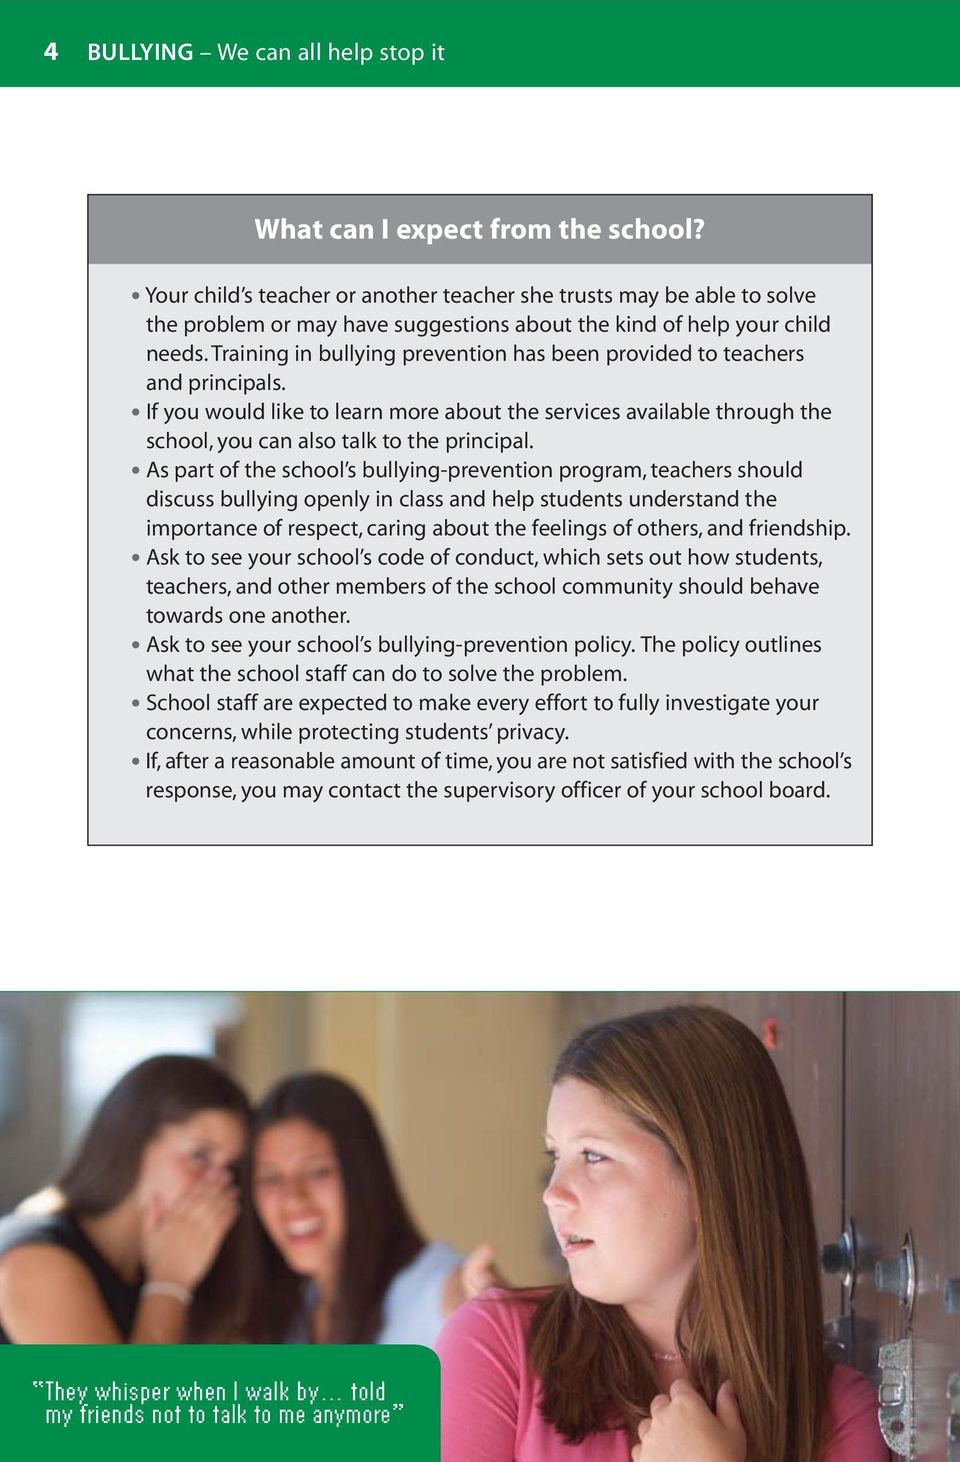 Training in bullying prevention has been provided to teachers and principals. If you would like to learn more about the services available through the school, you can also talk to the principal.